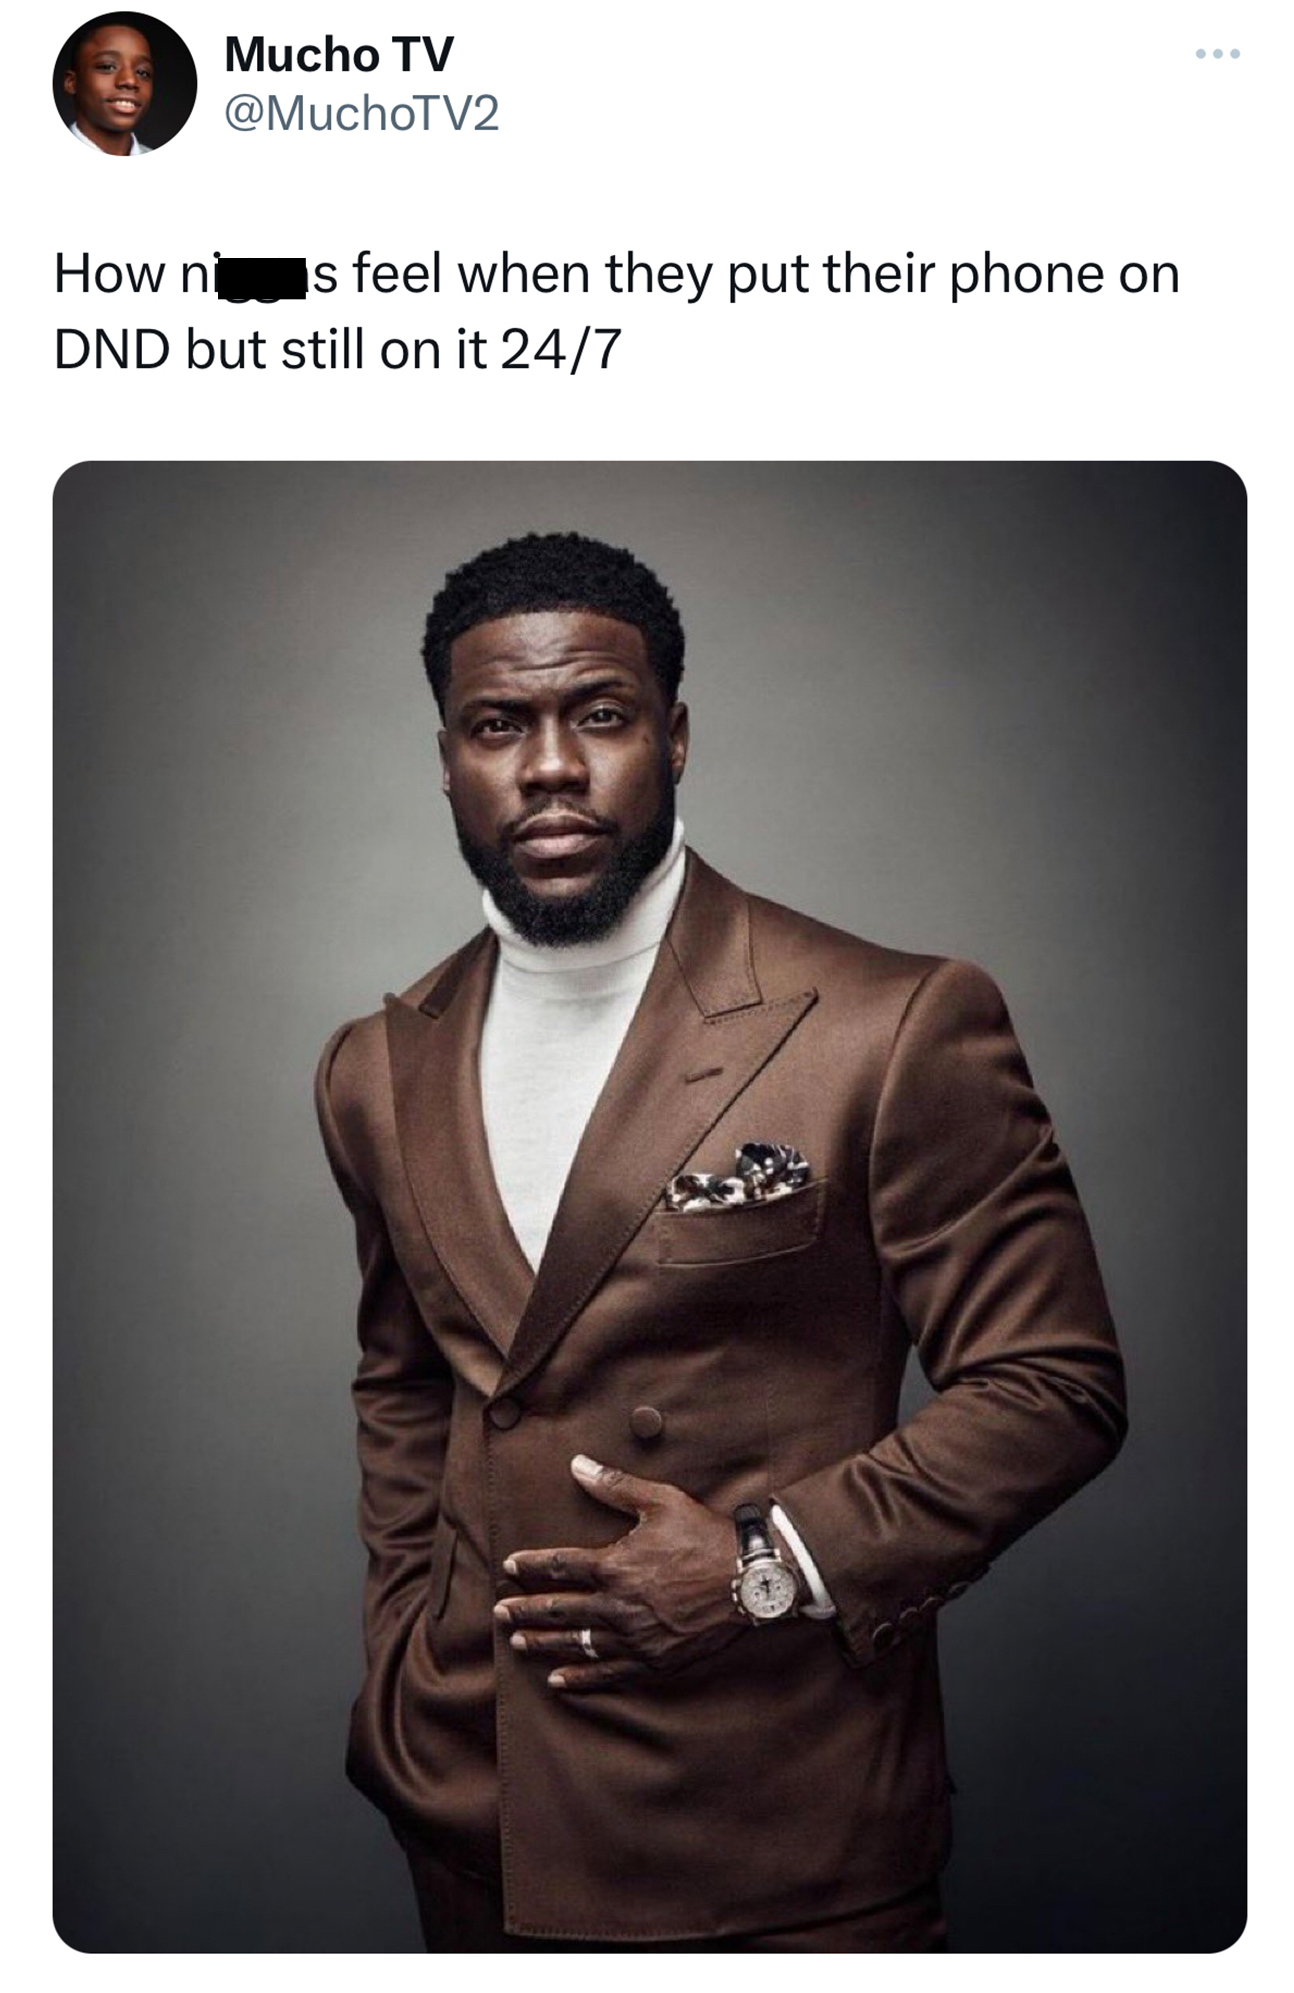 Kevin Hart Is Confused by All the Memes, So the Answered with